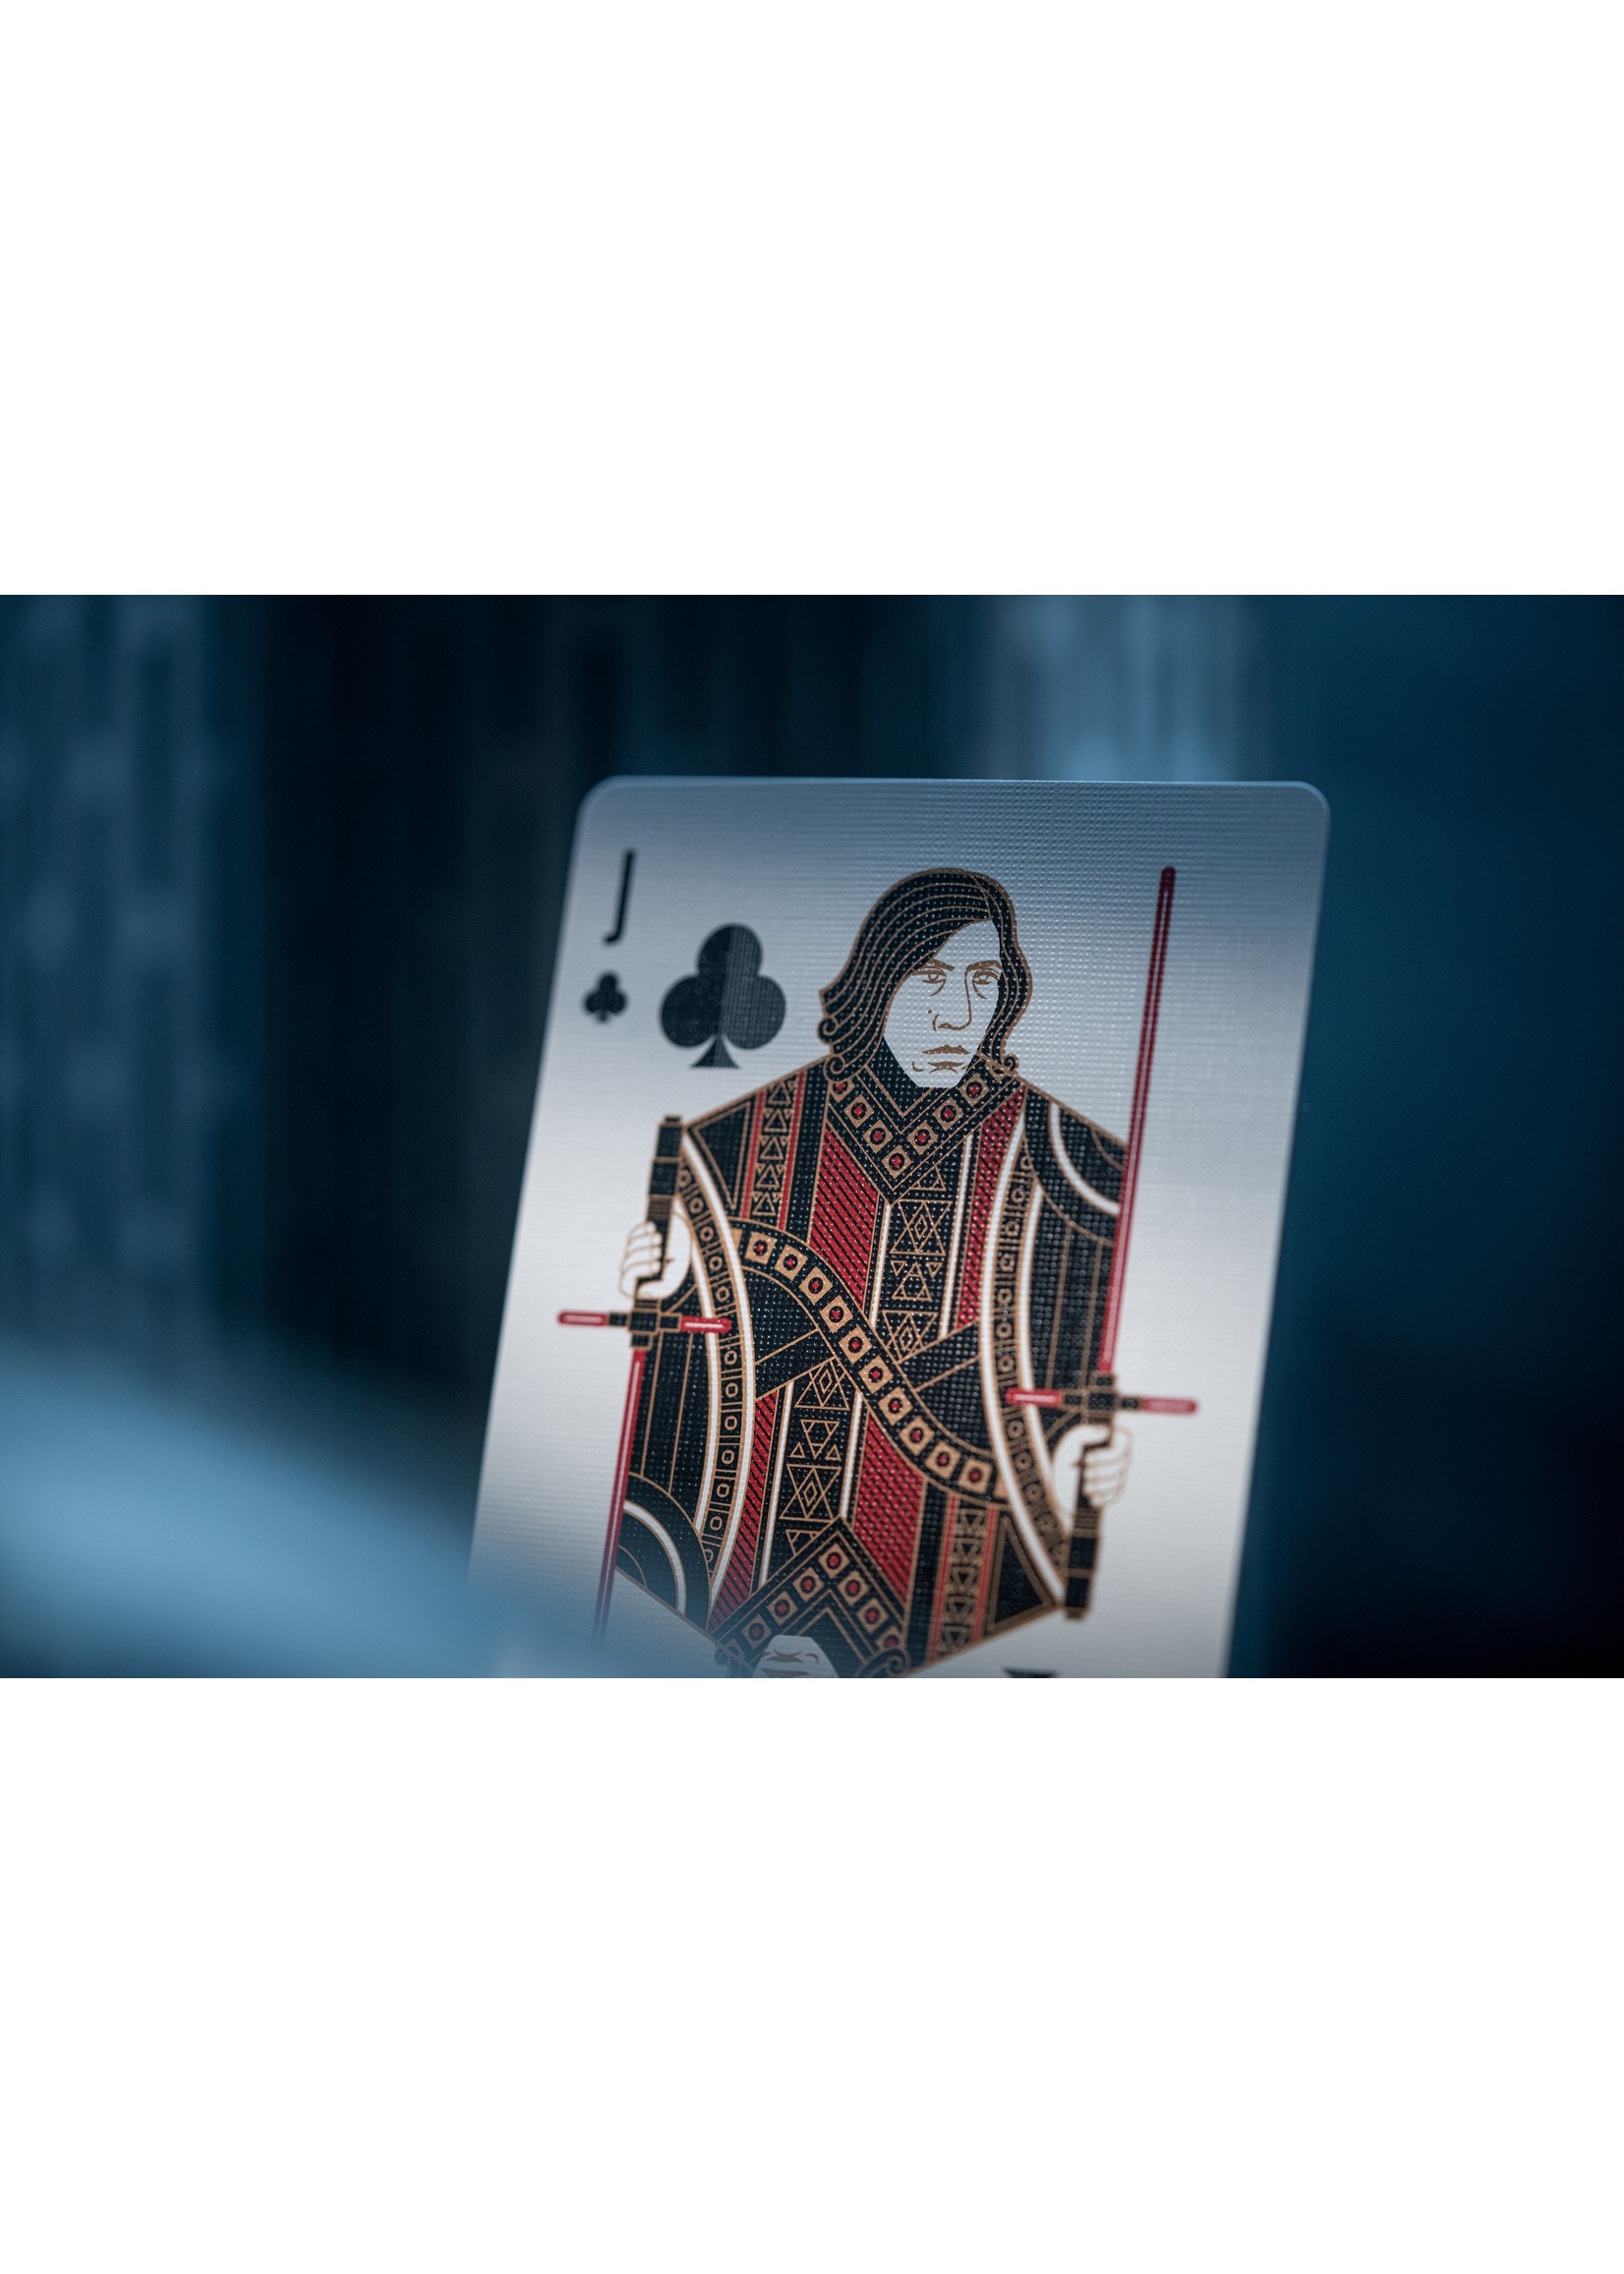 Theory11 Theory11:  Star Wars Dark Side Playing Cards